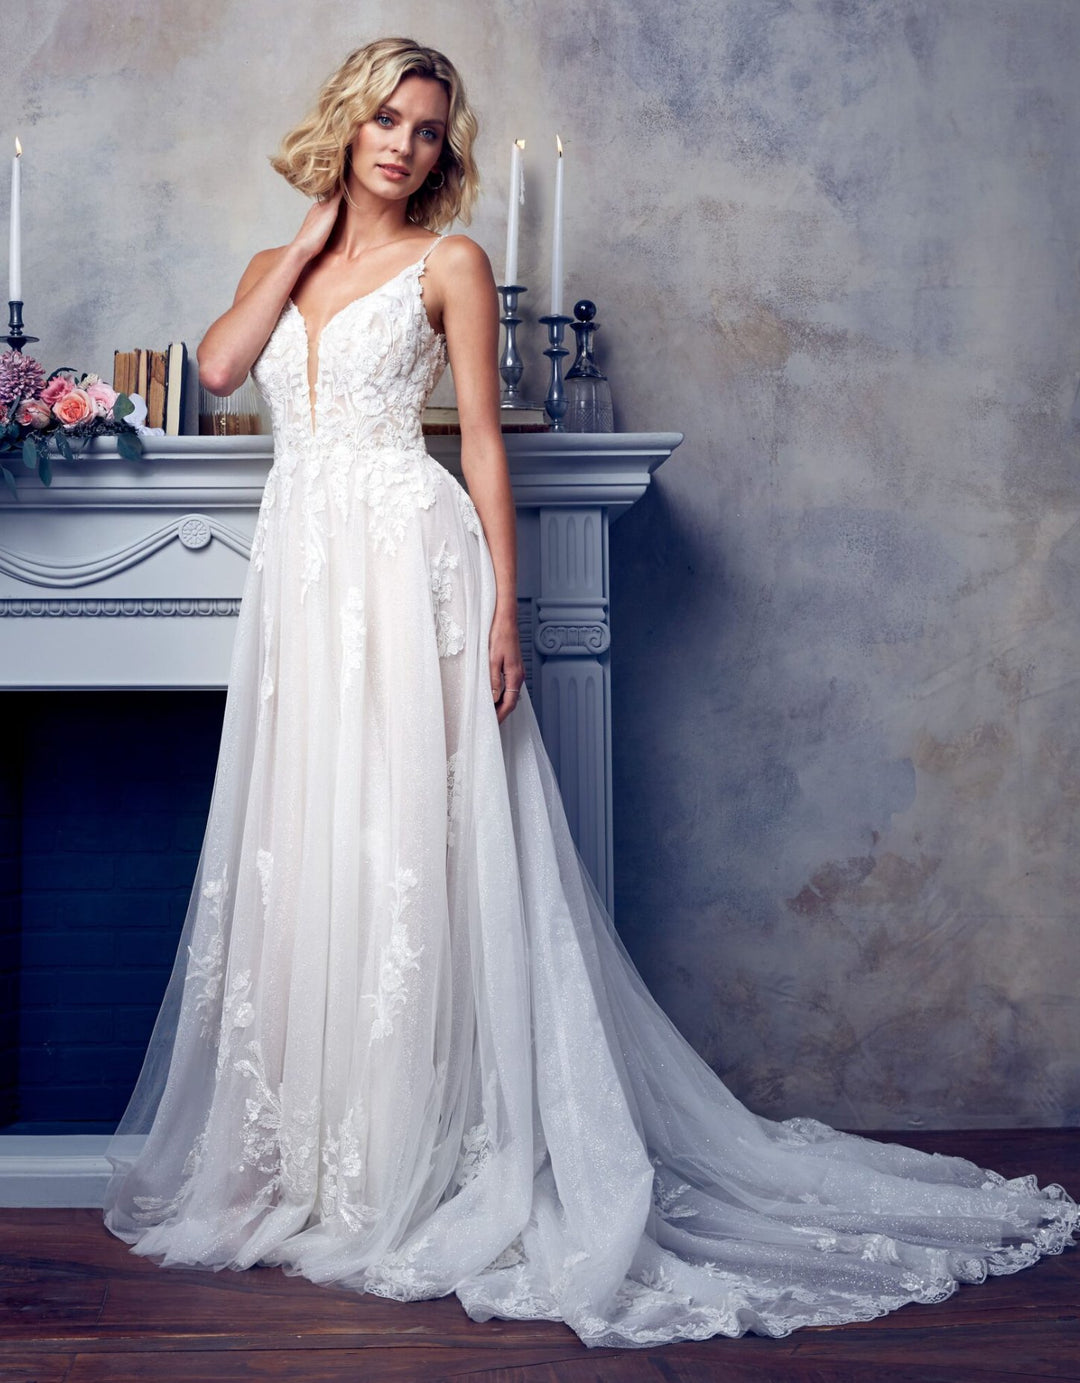 3202 – Bride-to-Be Outlet